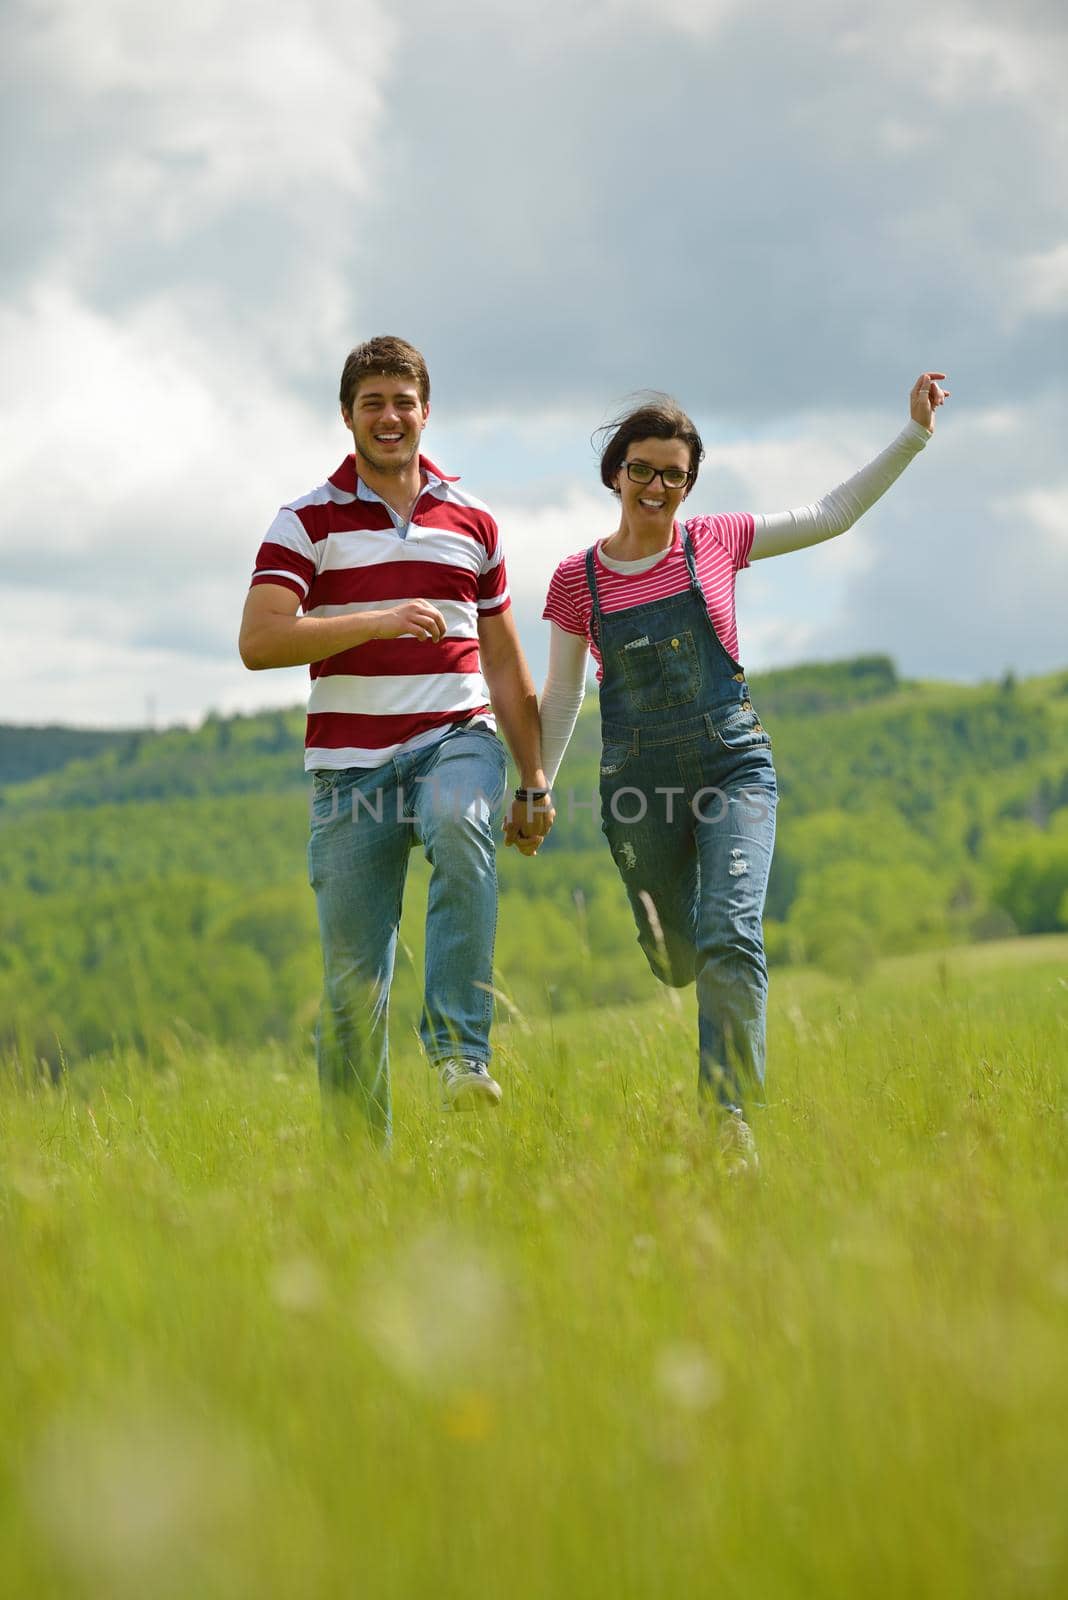 romantic young couple in love together outdoor by dotshock